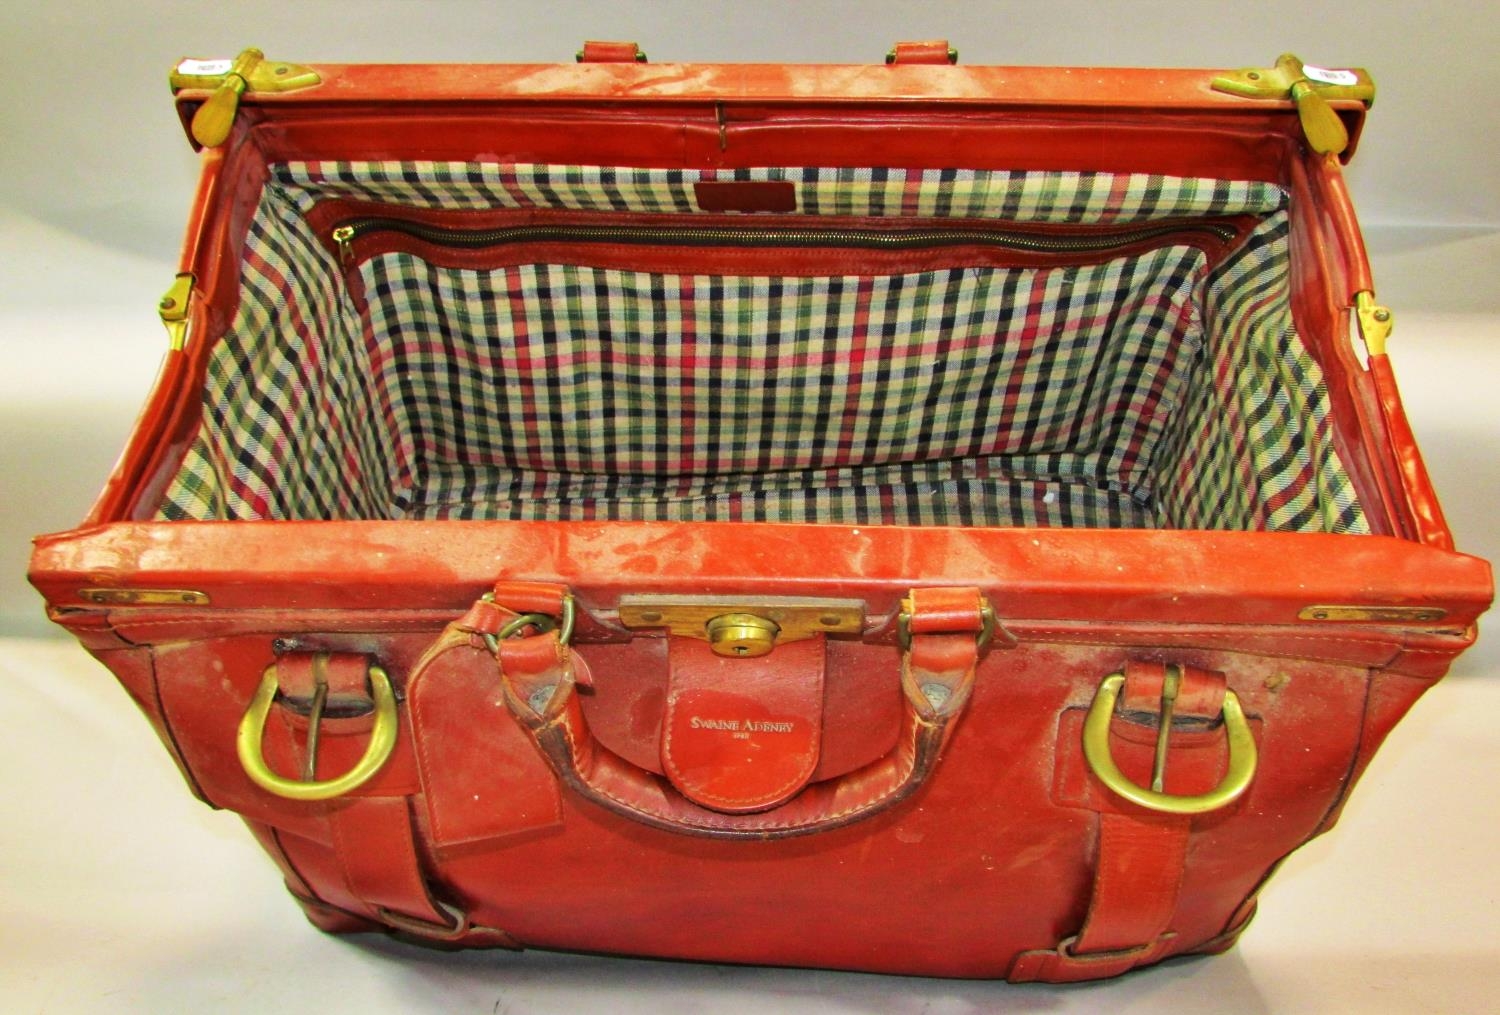 A Vintage Swain Adeney brown leather Gladstone bag, with decent stitching and fastenings - Image 2 of 3